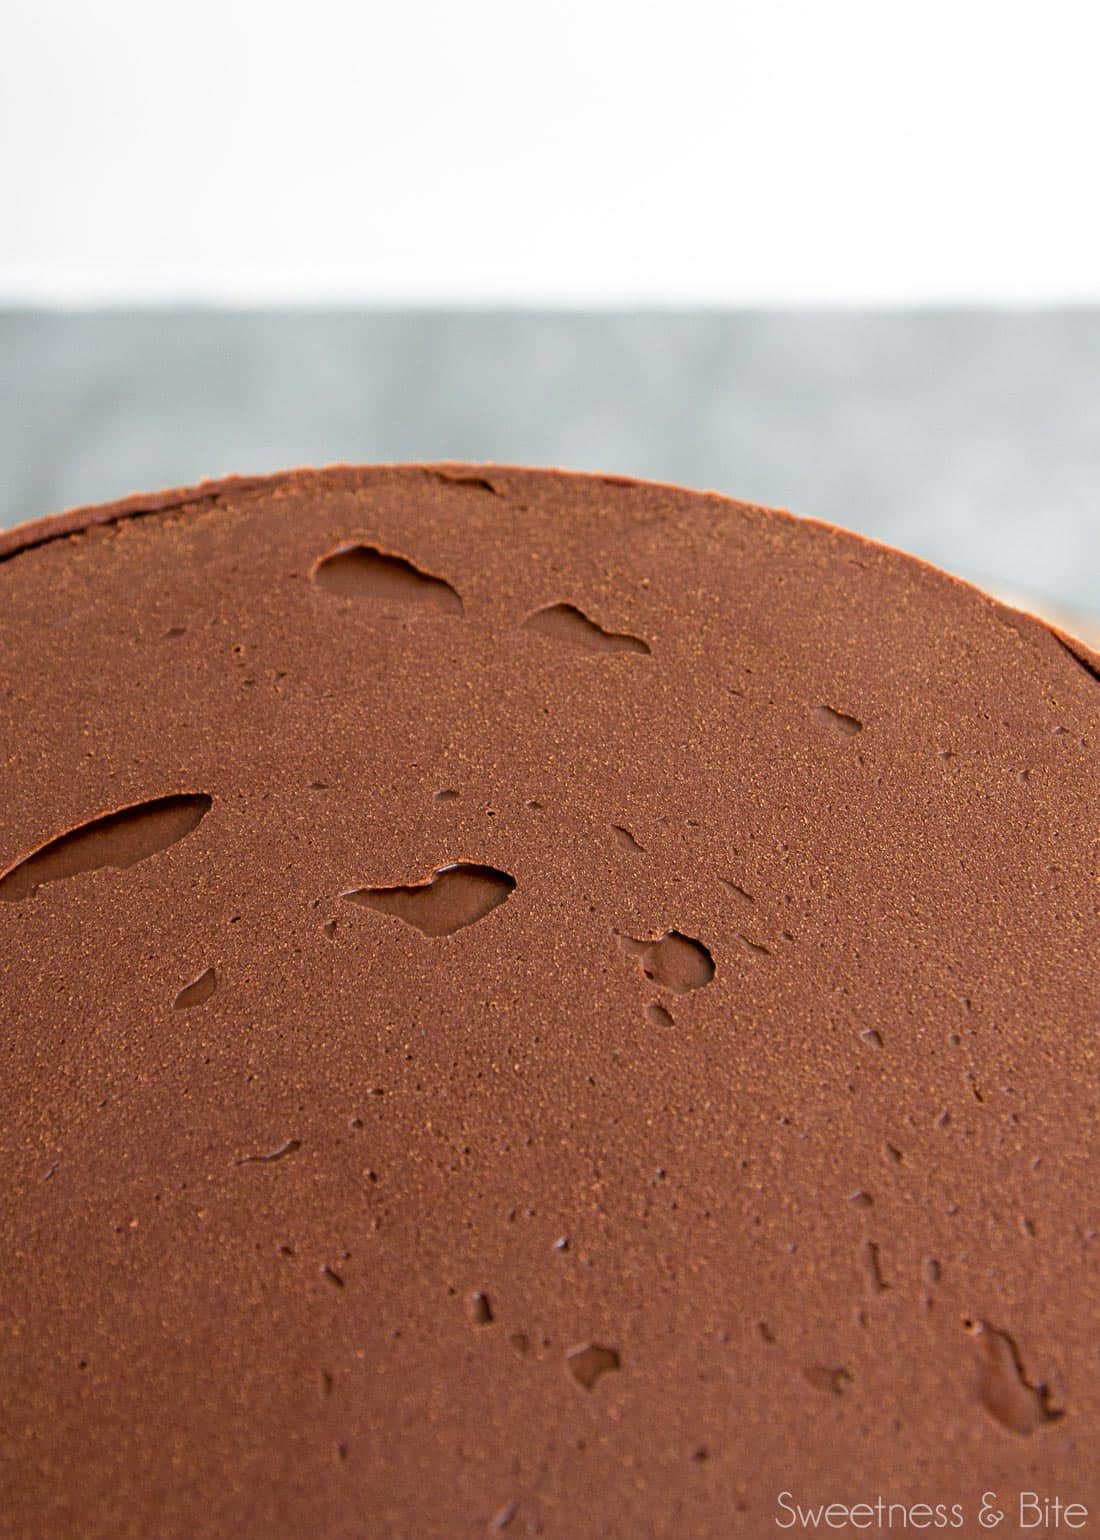 The top of a ganached cake, showing small holes from air bubbles in the ganache.